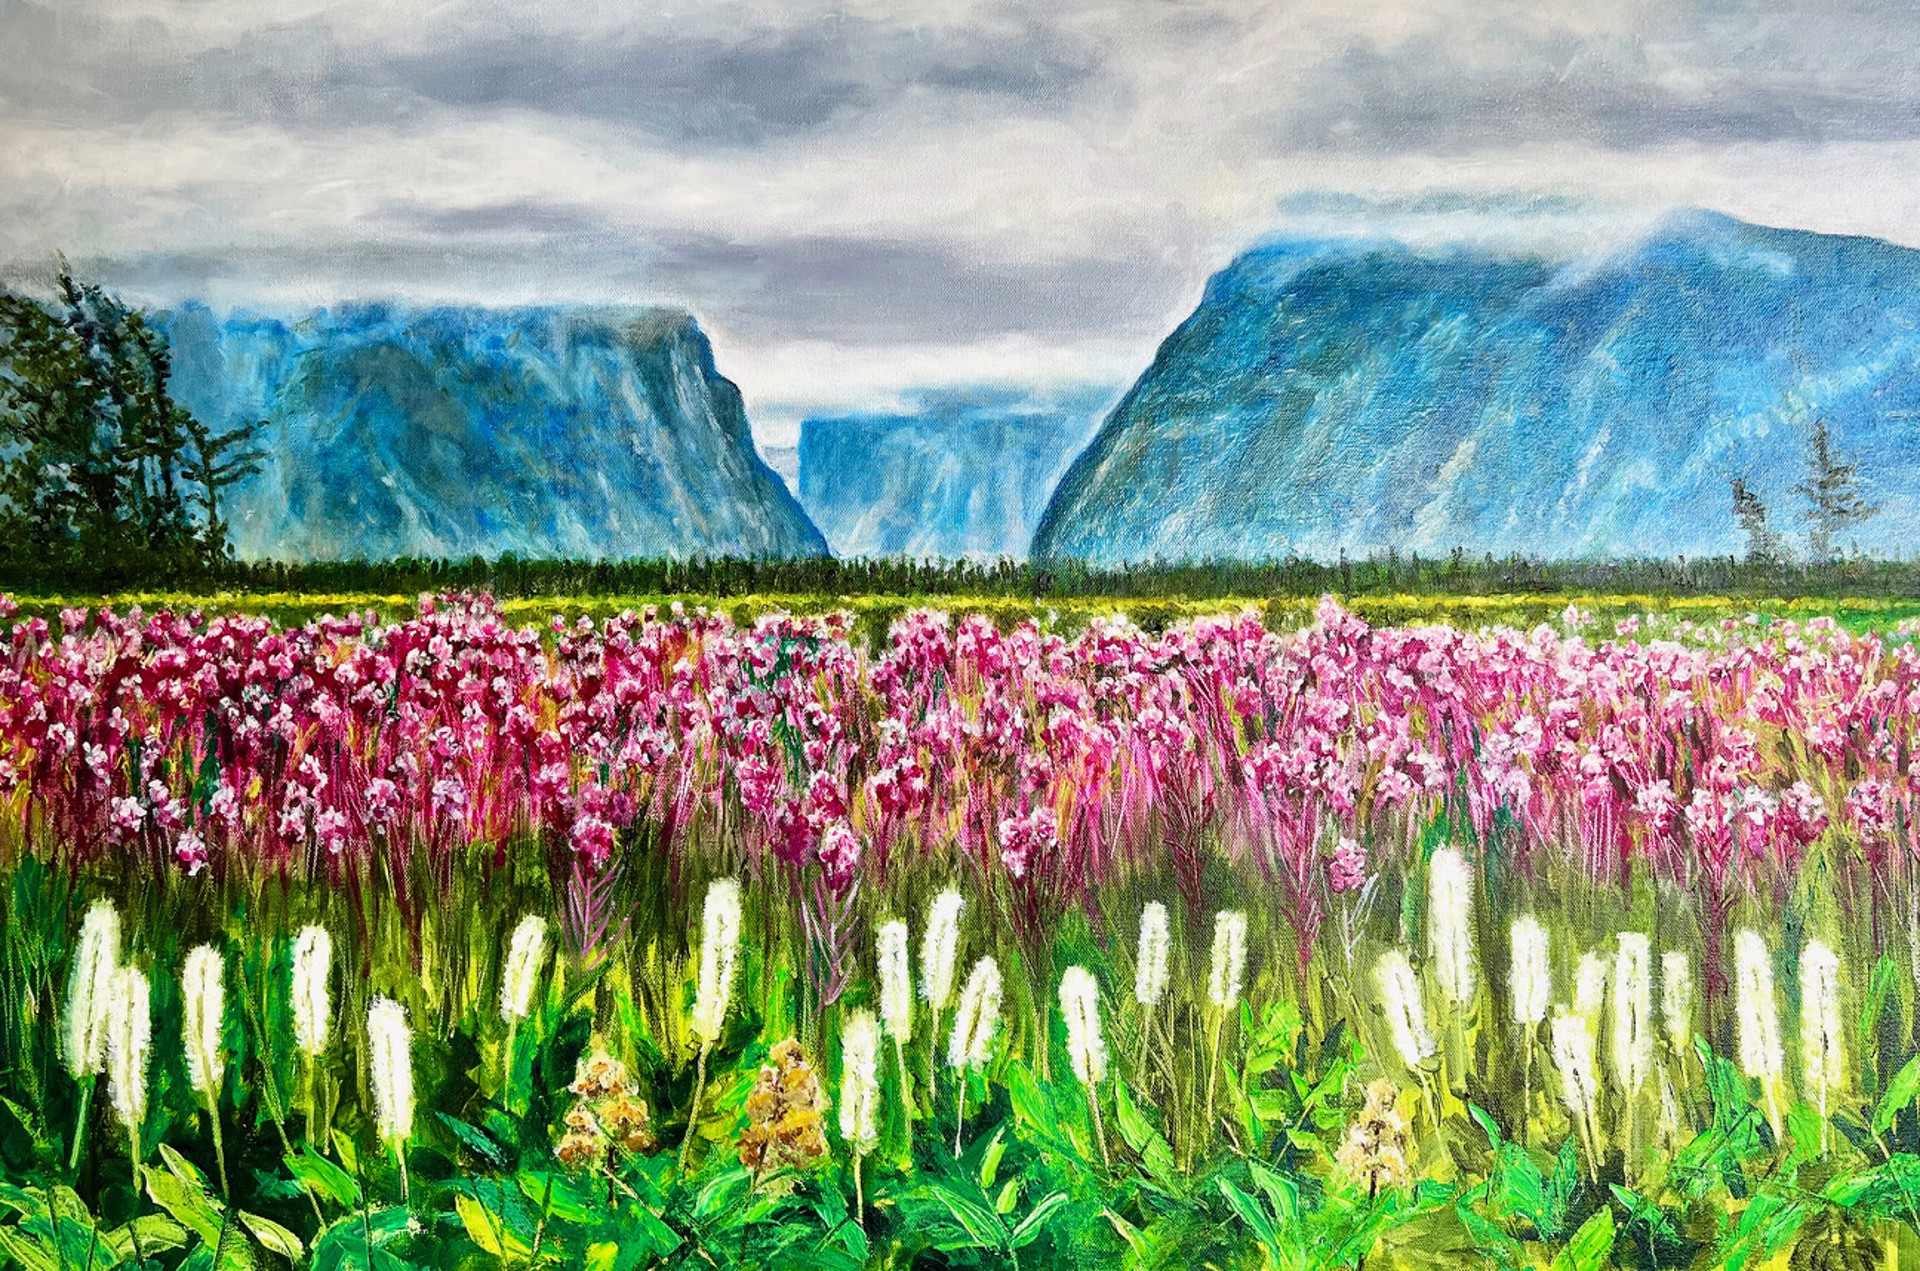 Approach to Western Brook Pond by Loreta Hume